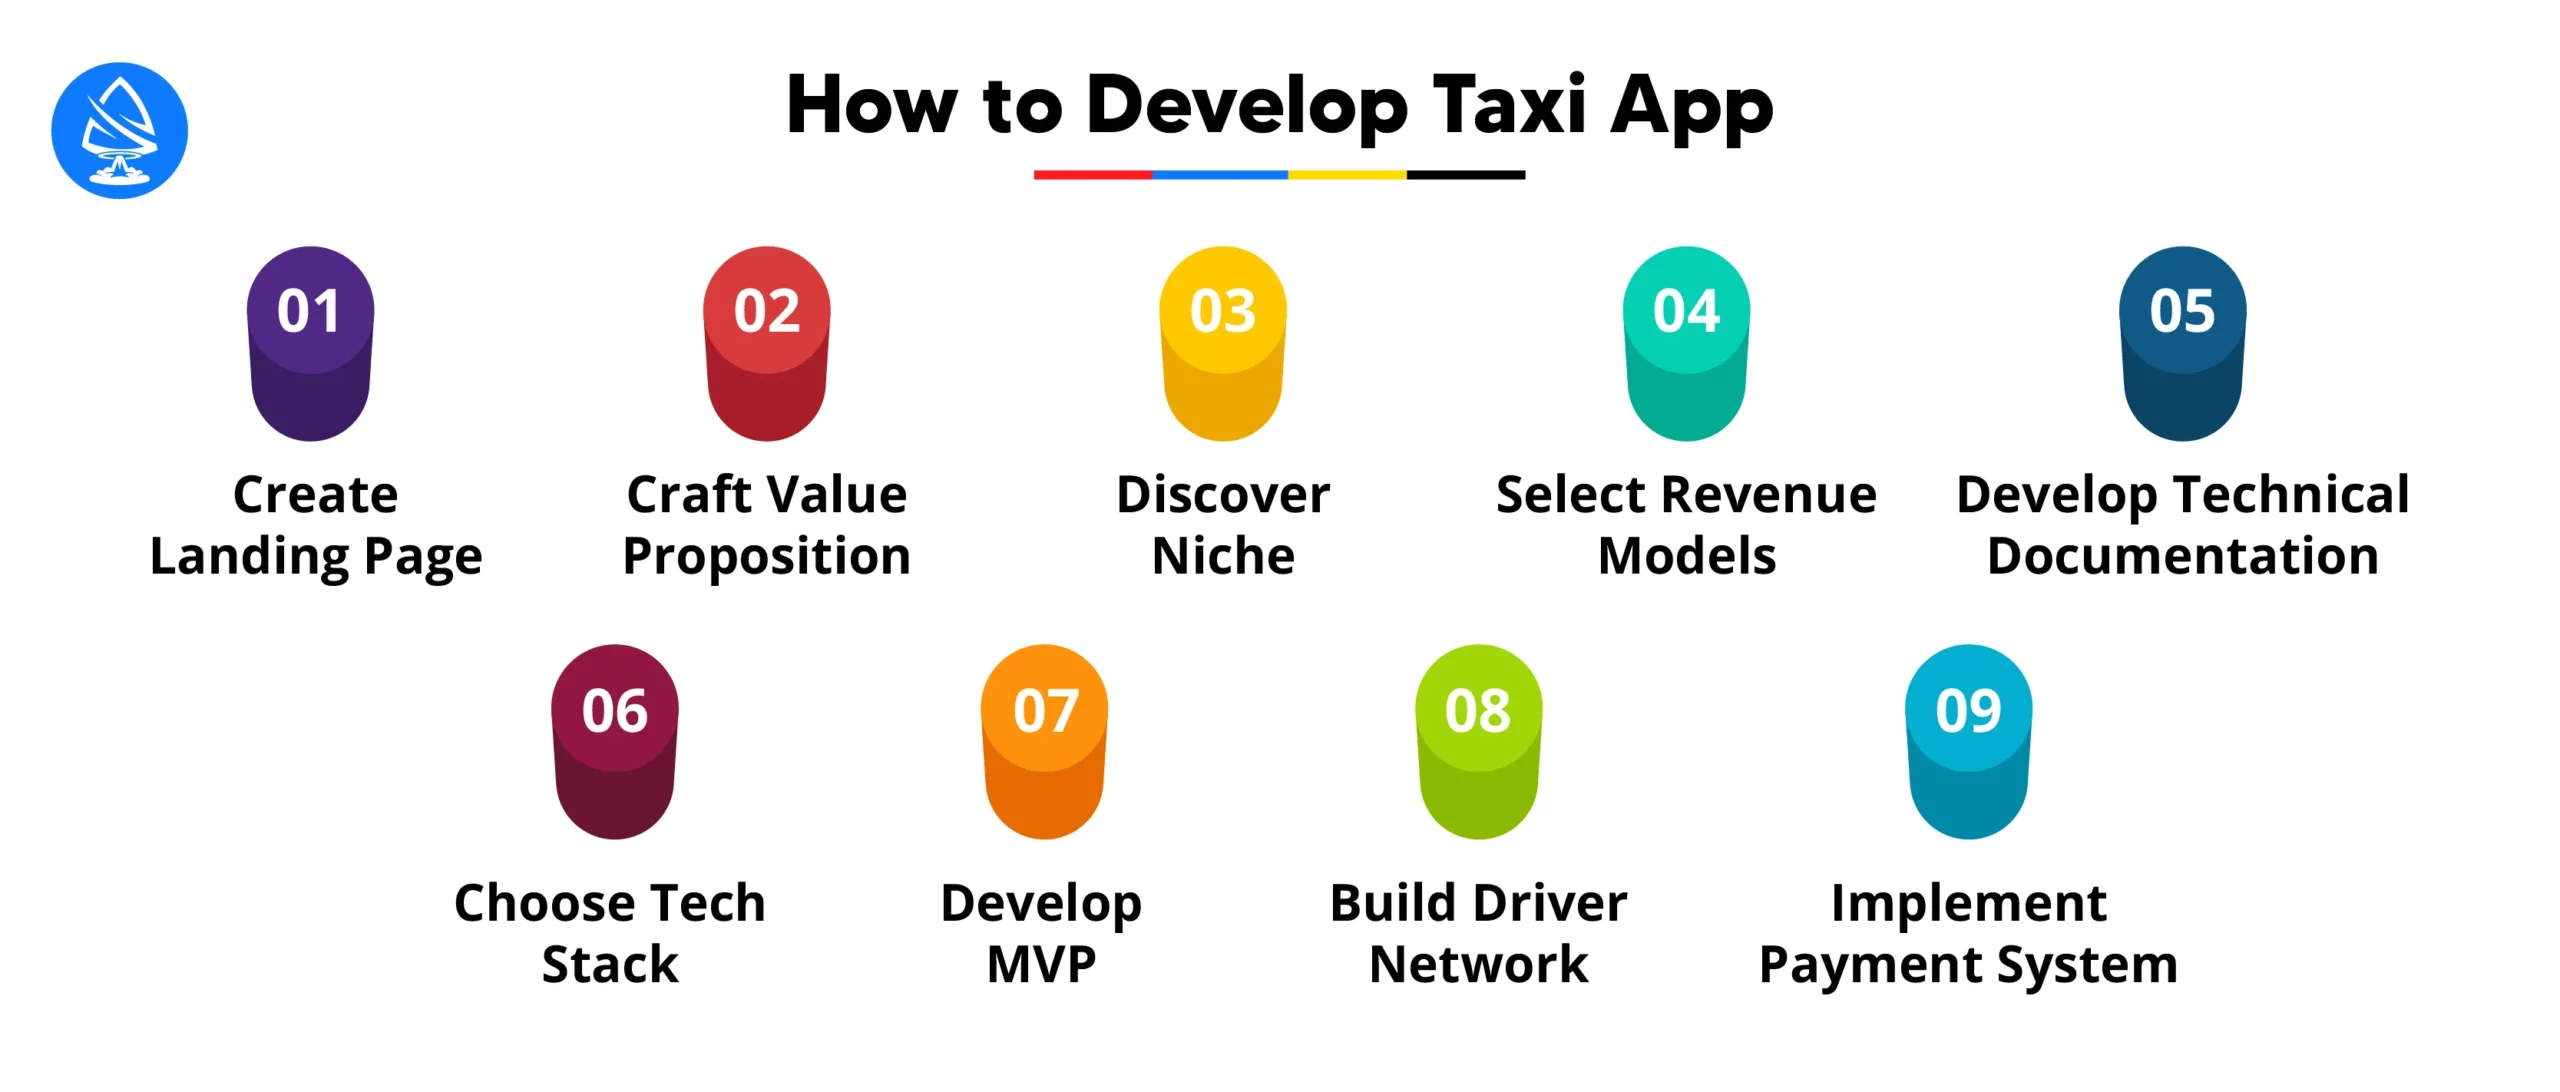 How to Develop a Taxi App